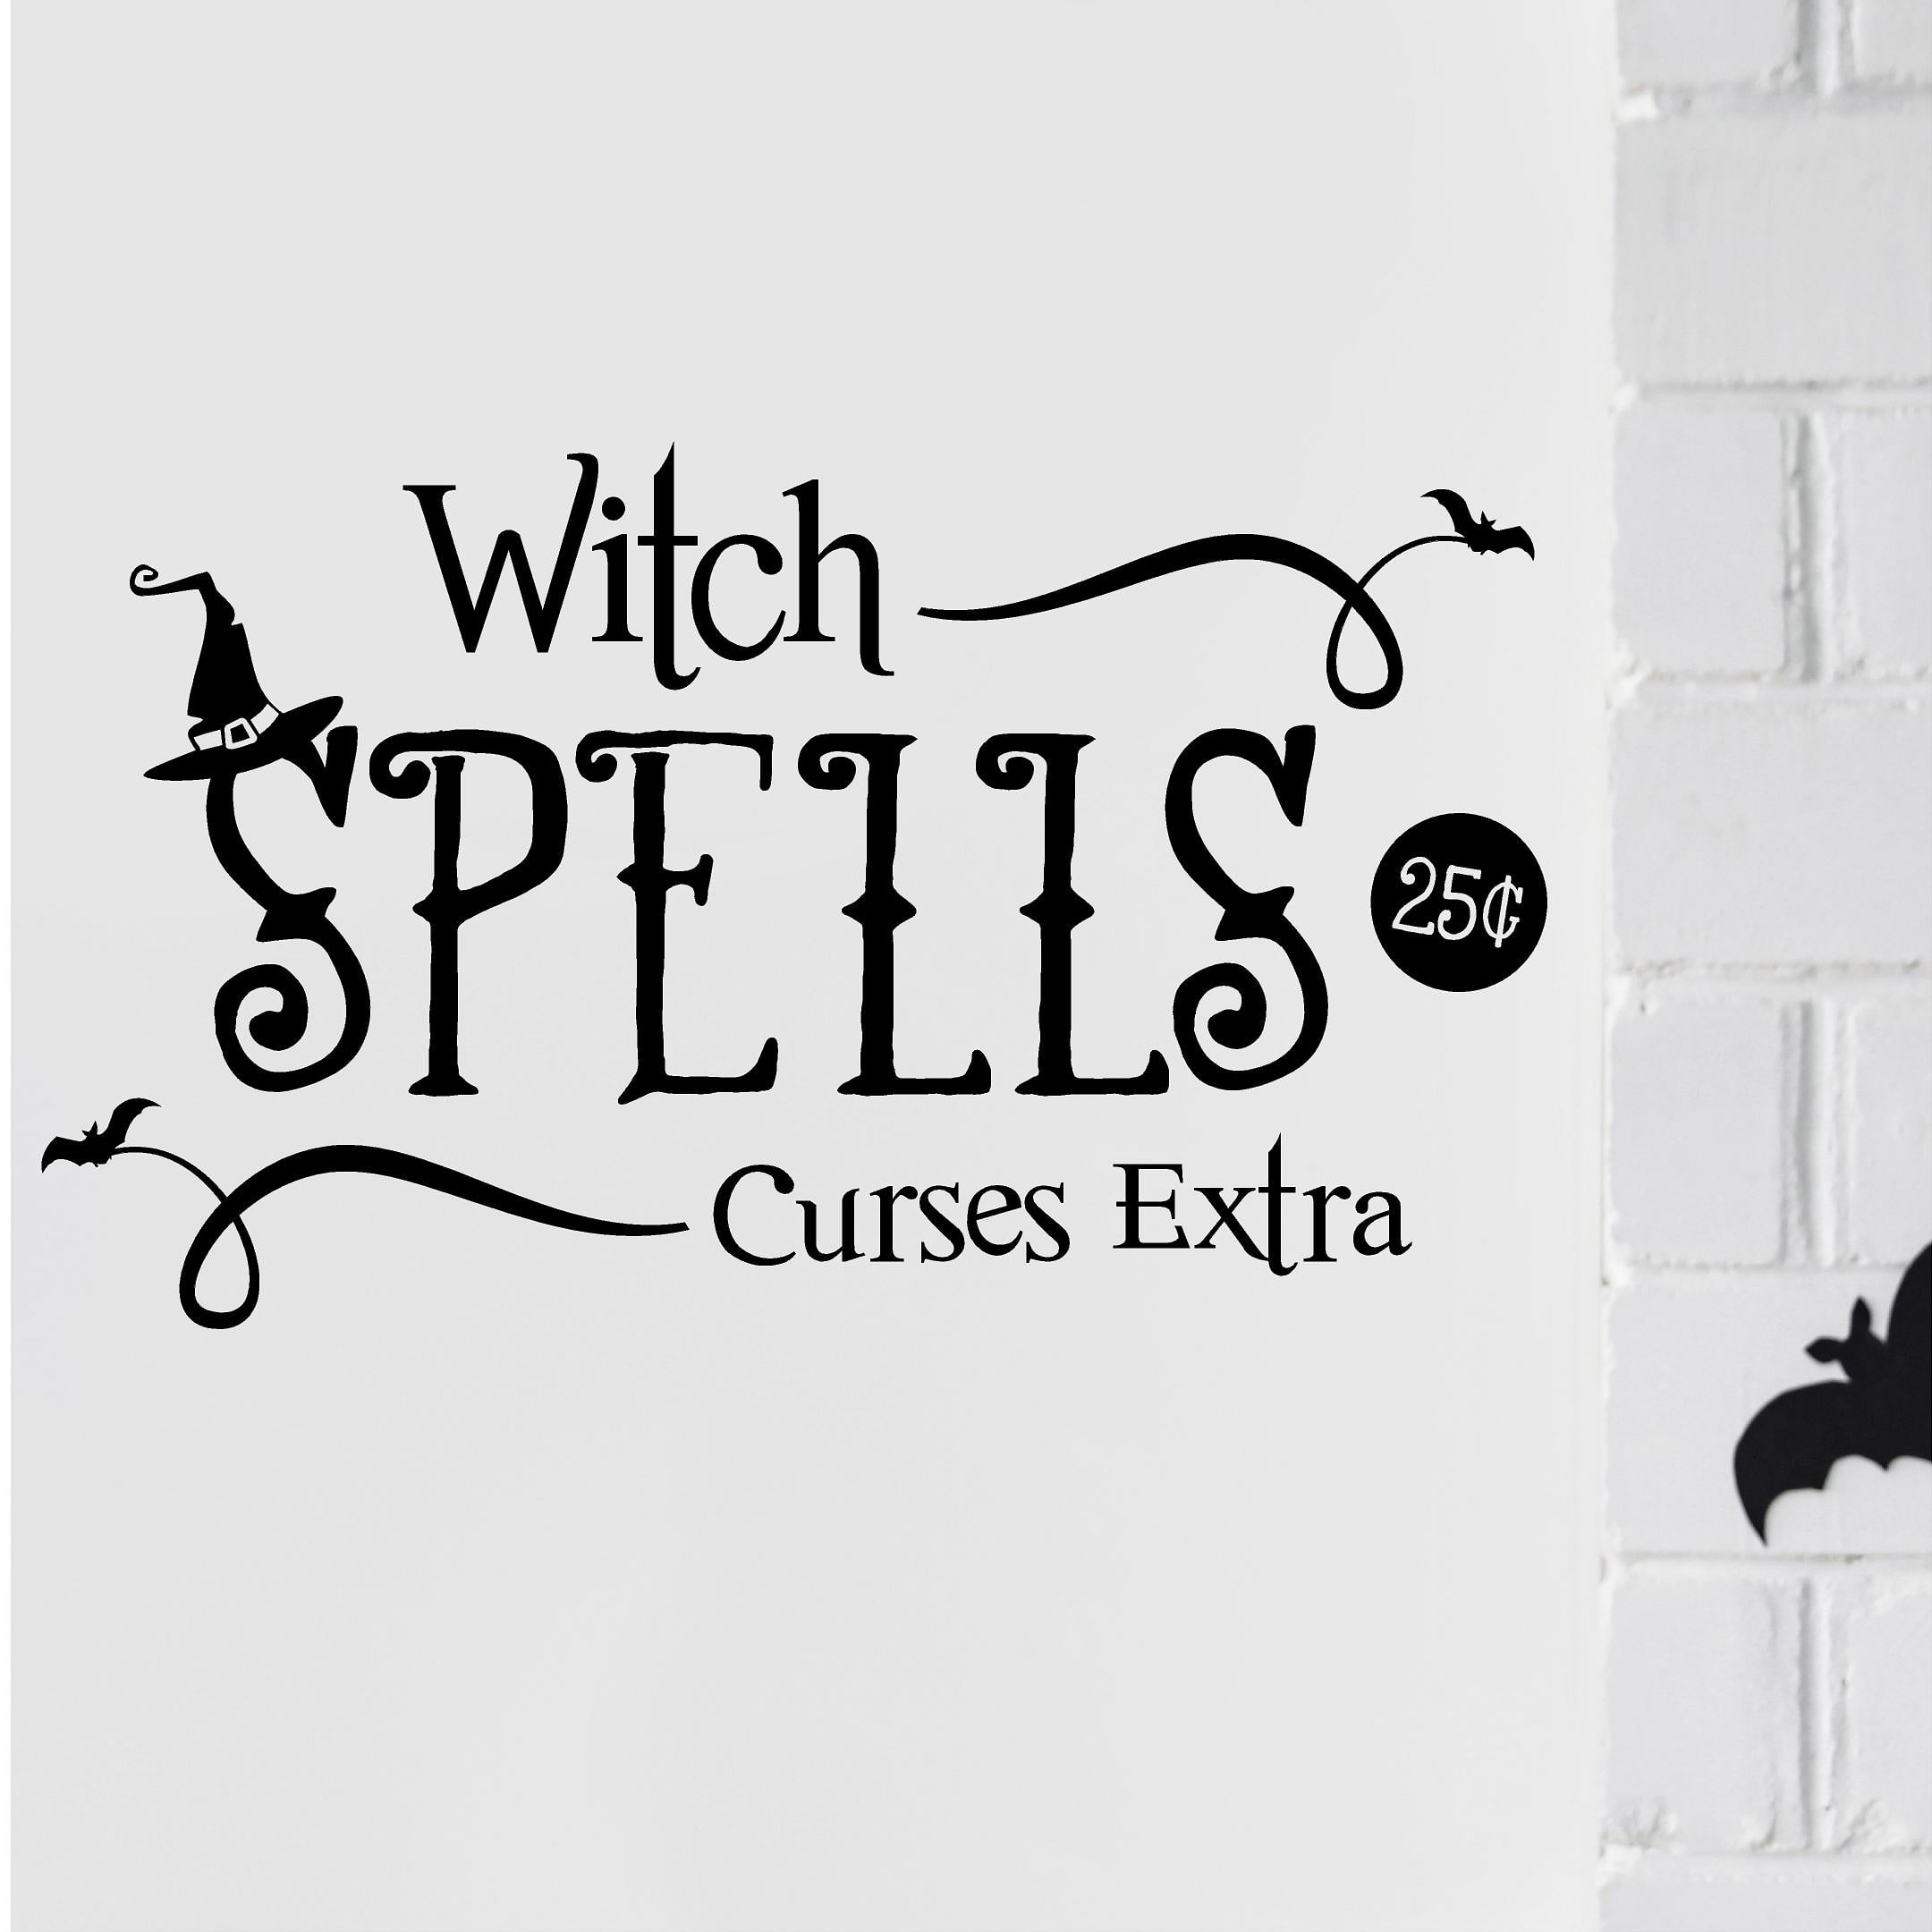 witchcraft spells and curses